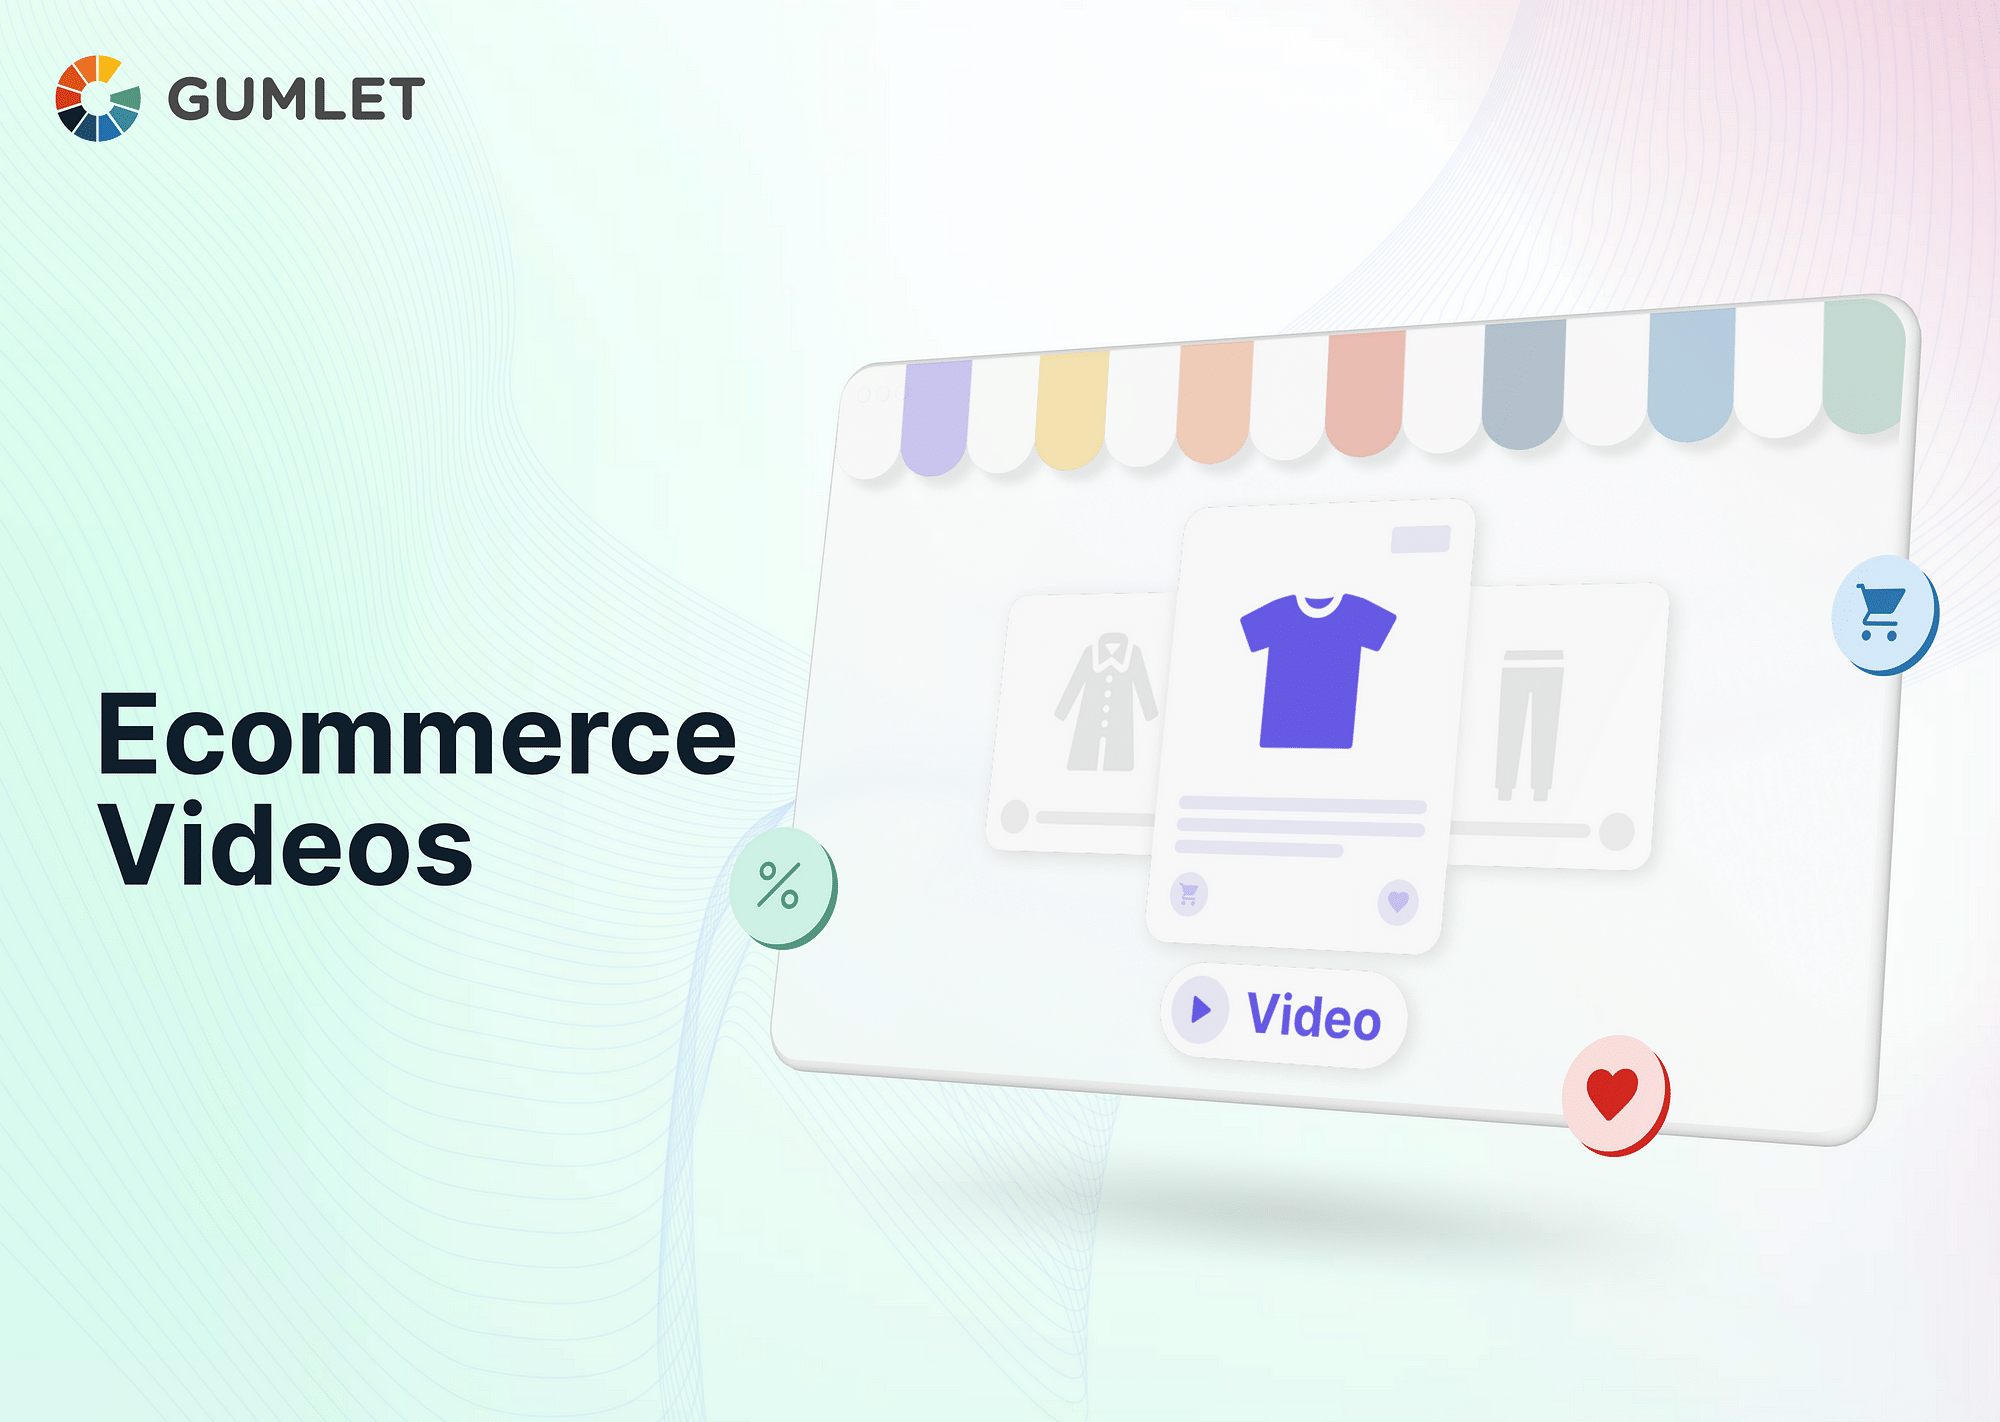 Best E-Commerce Videos to Increase Your E-Commerce Sales